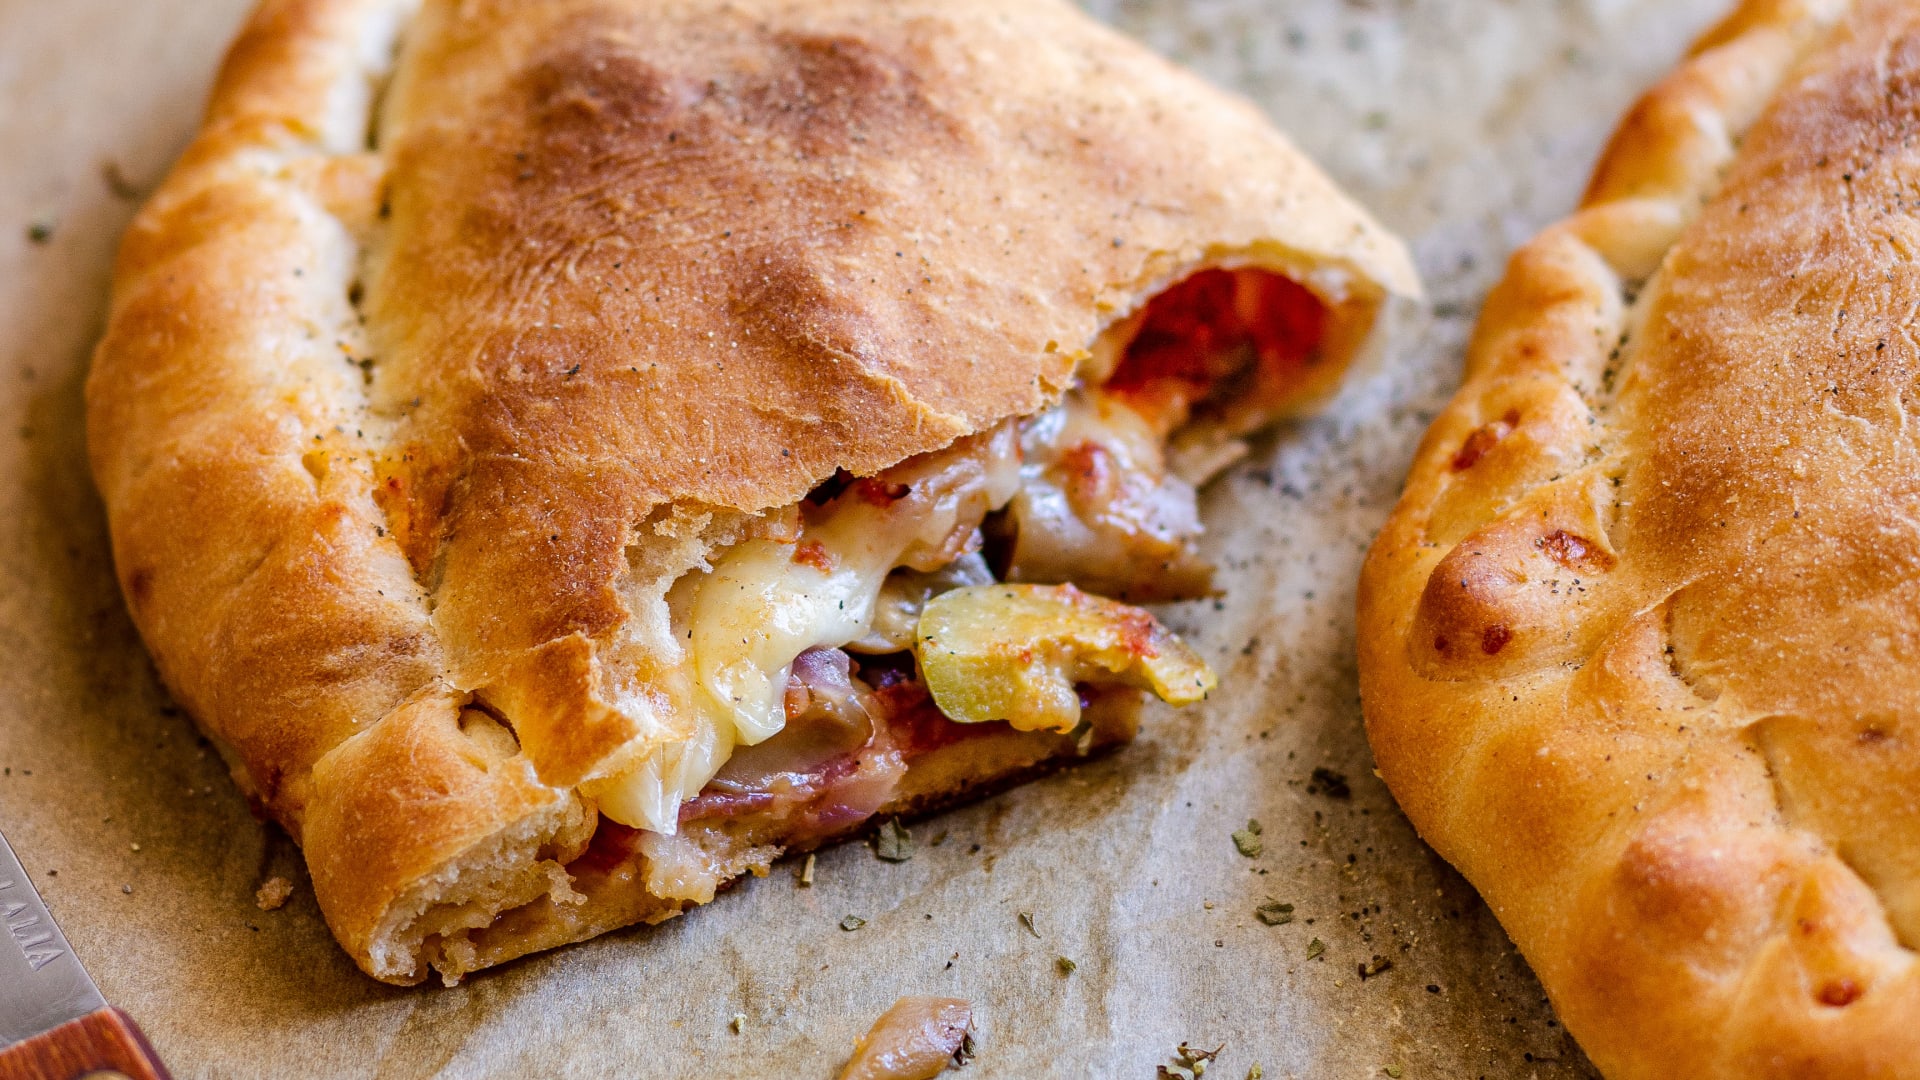 Egg Roll Wrapper Calzones - Make the Best of Everything